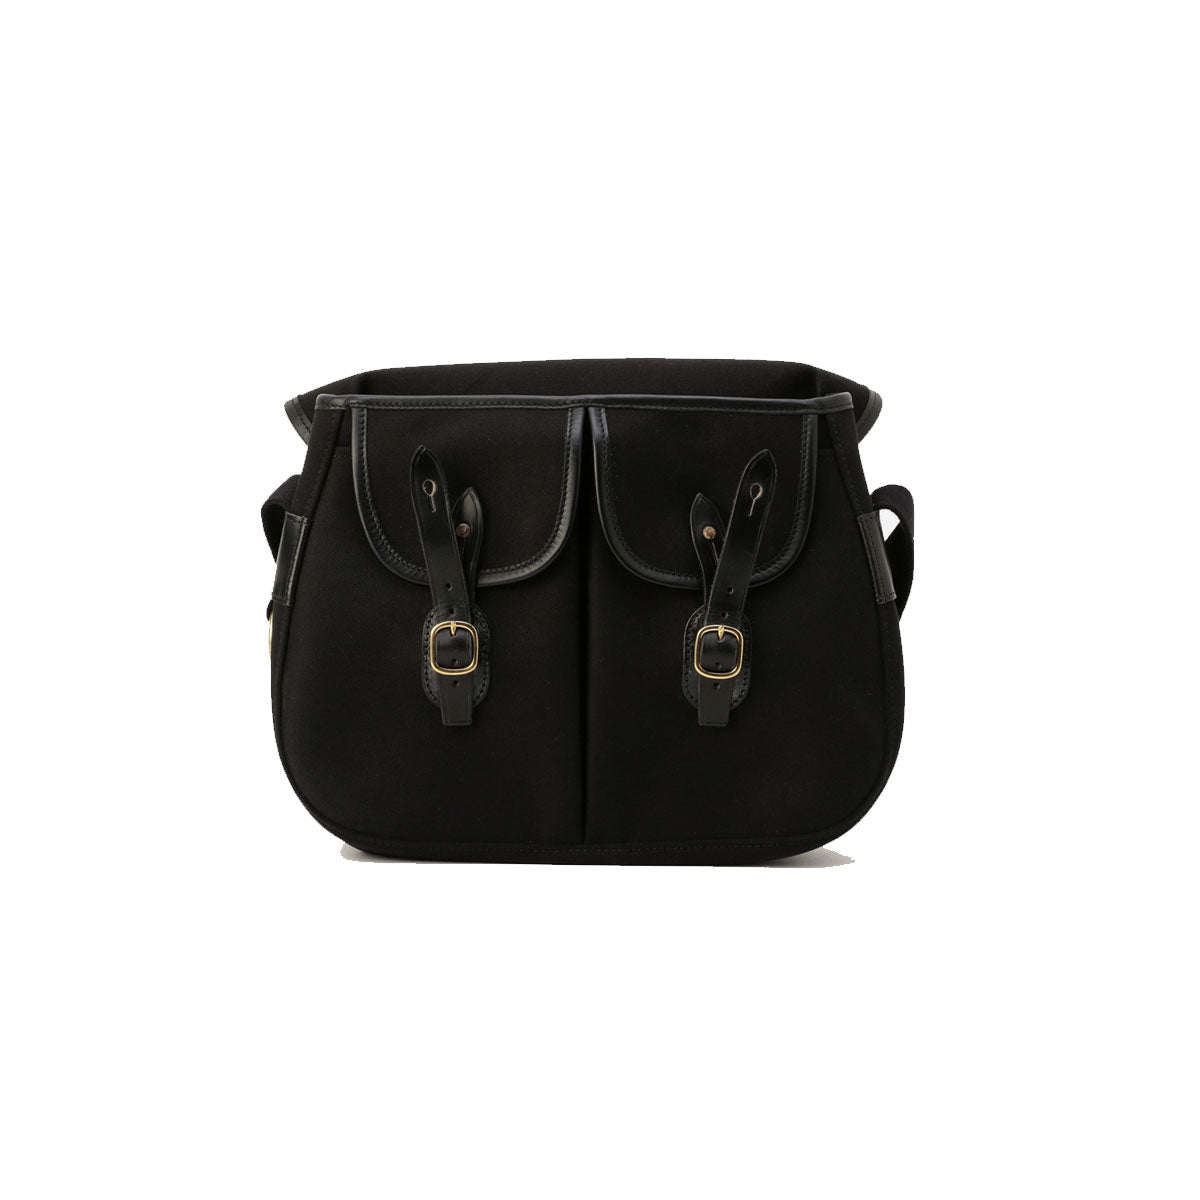 Ariel Small Bag by Brady | The Bag Creature